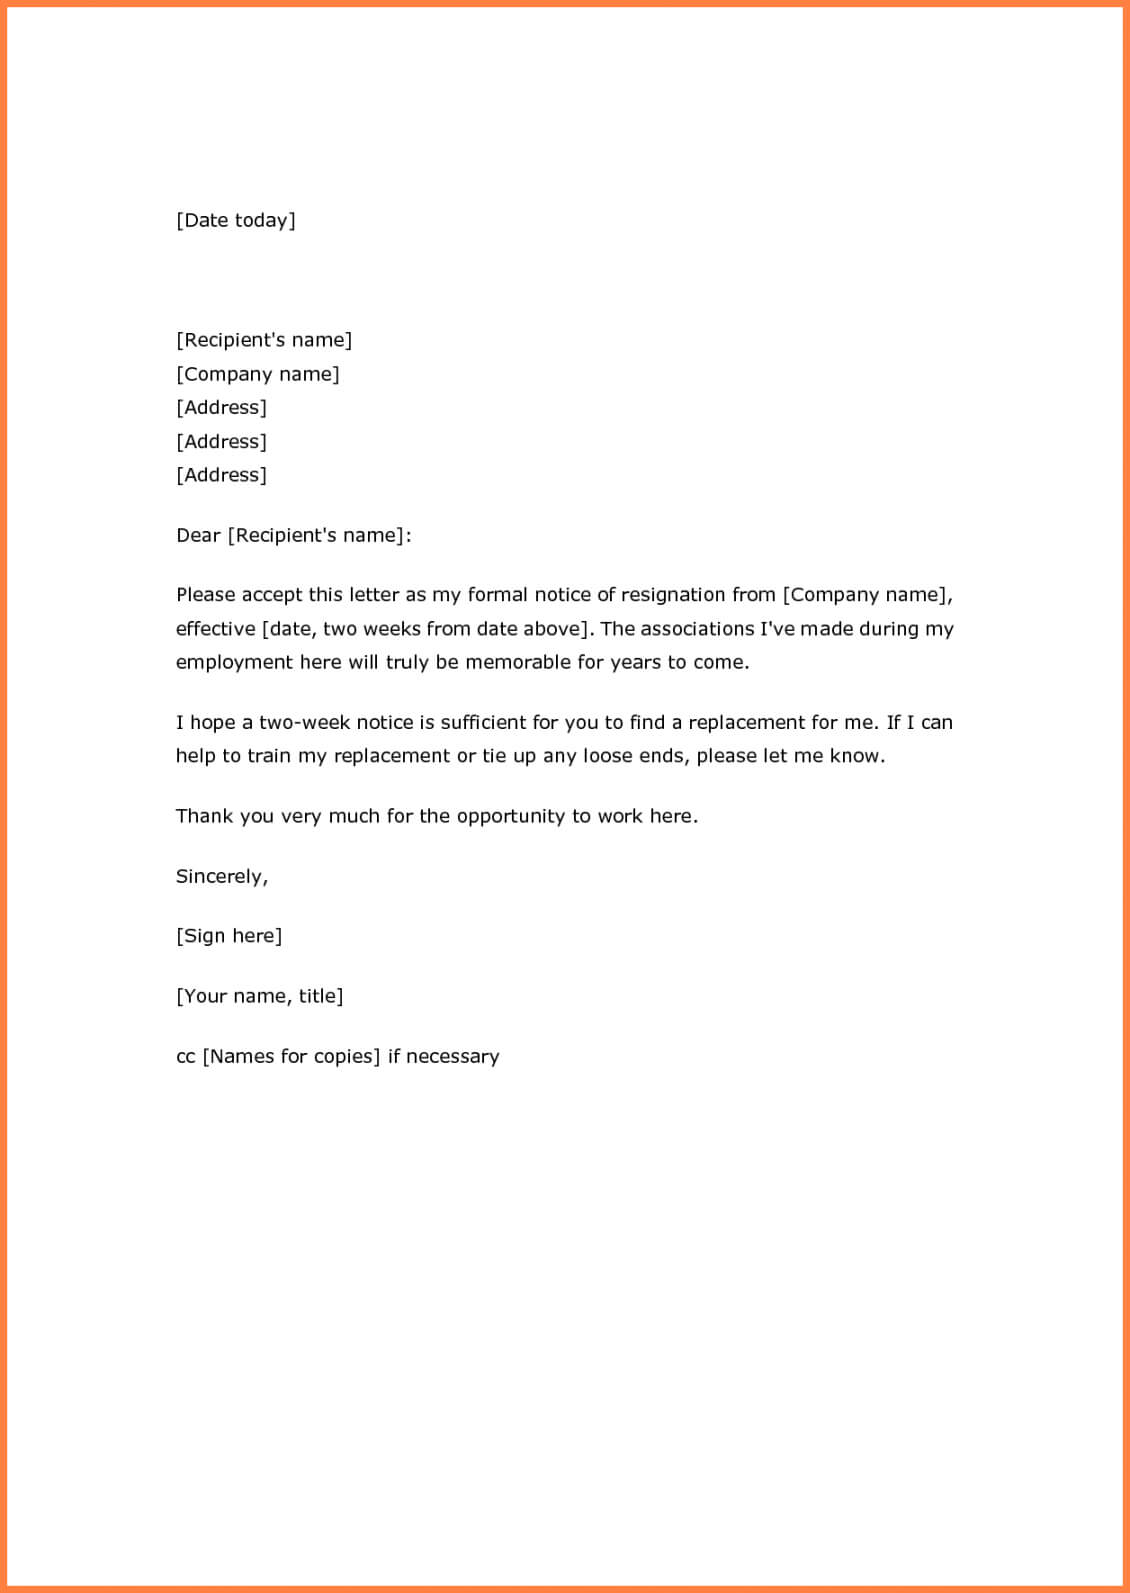 Costume Example Of Resignation Letter Two Weeks Notice 5 For Two Week Notice Template Word